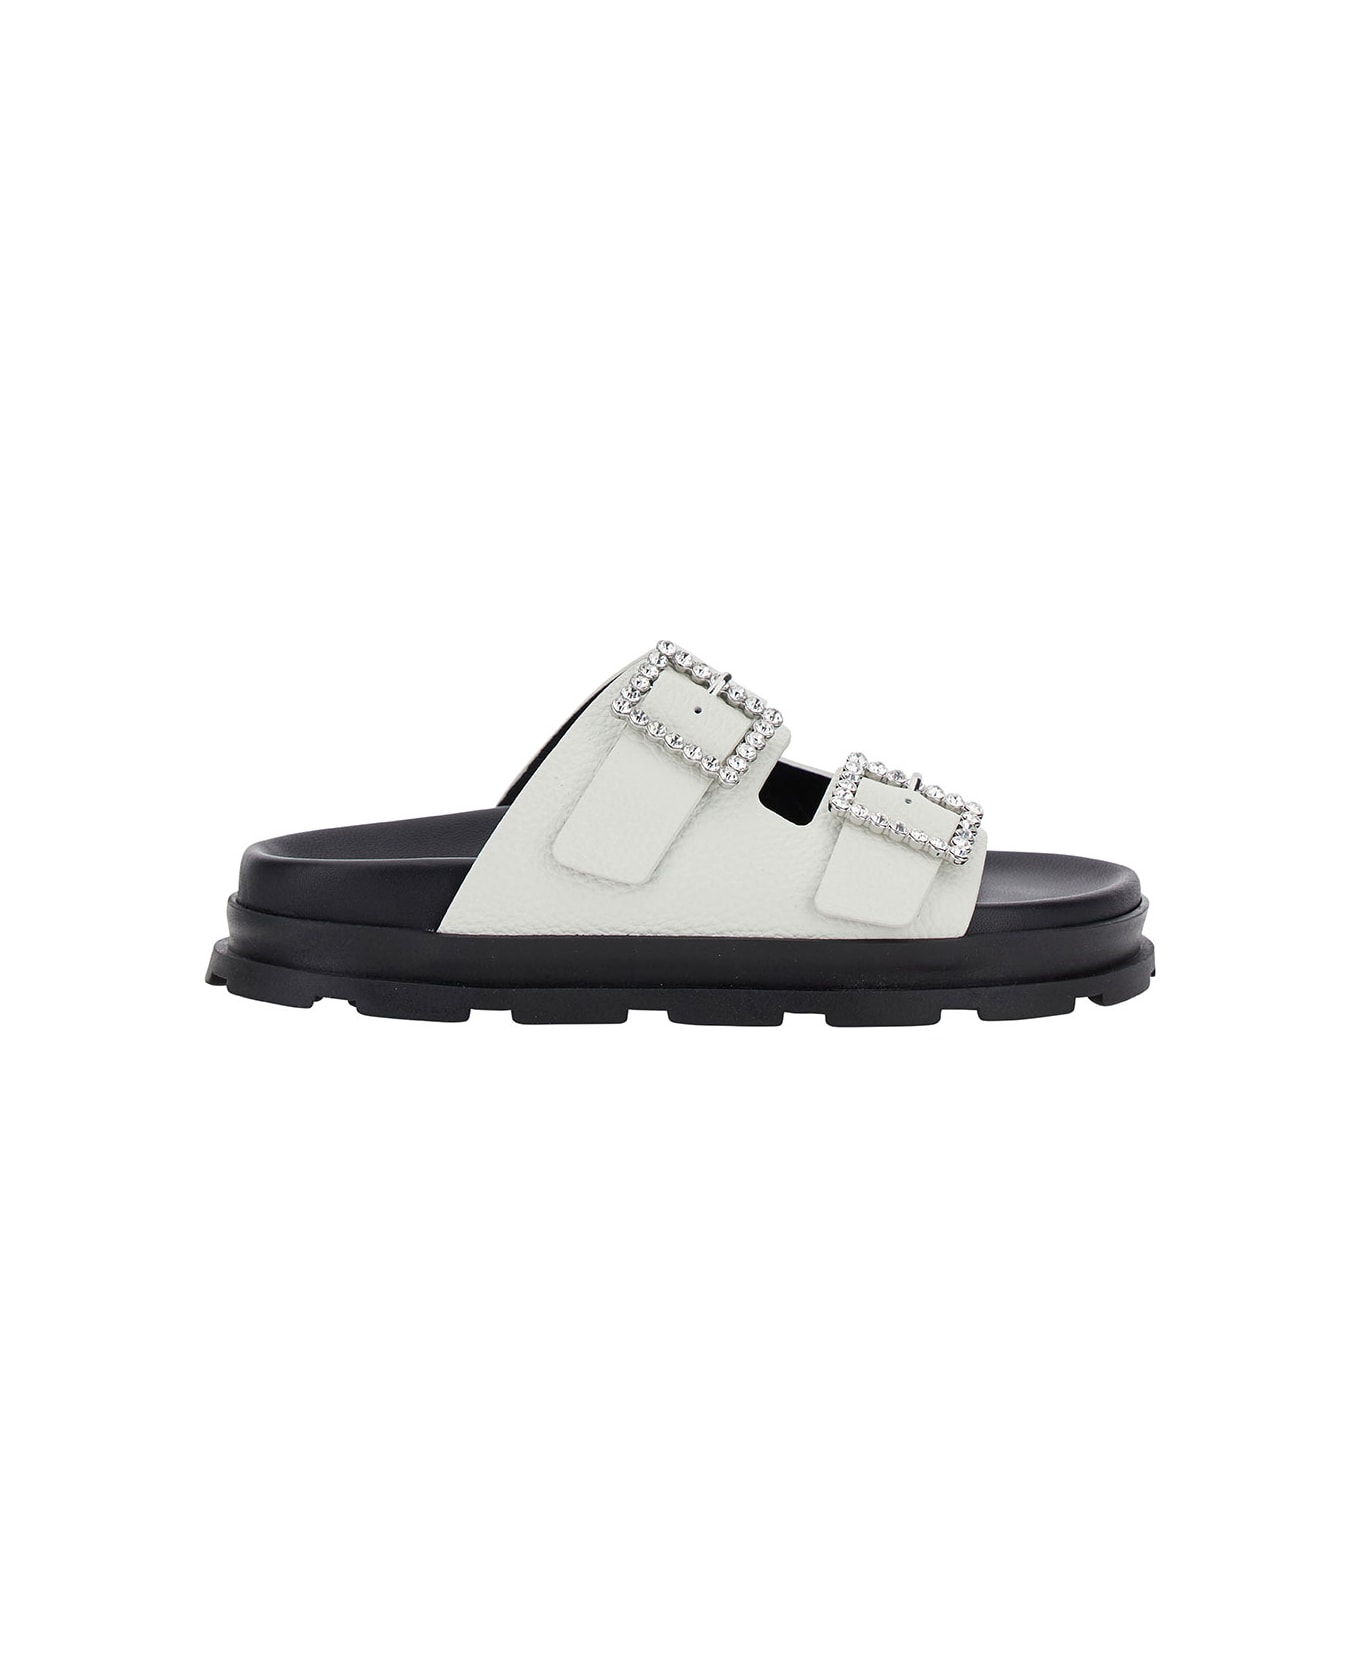 Pollini White Sandals With Rhinestone Buckle In Hammered Leather Woman - White